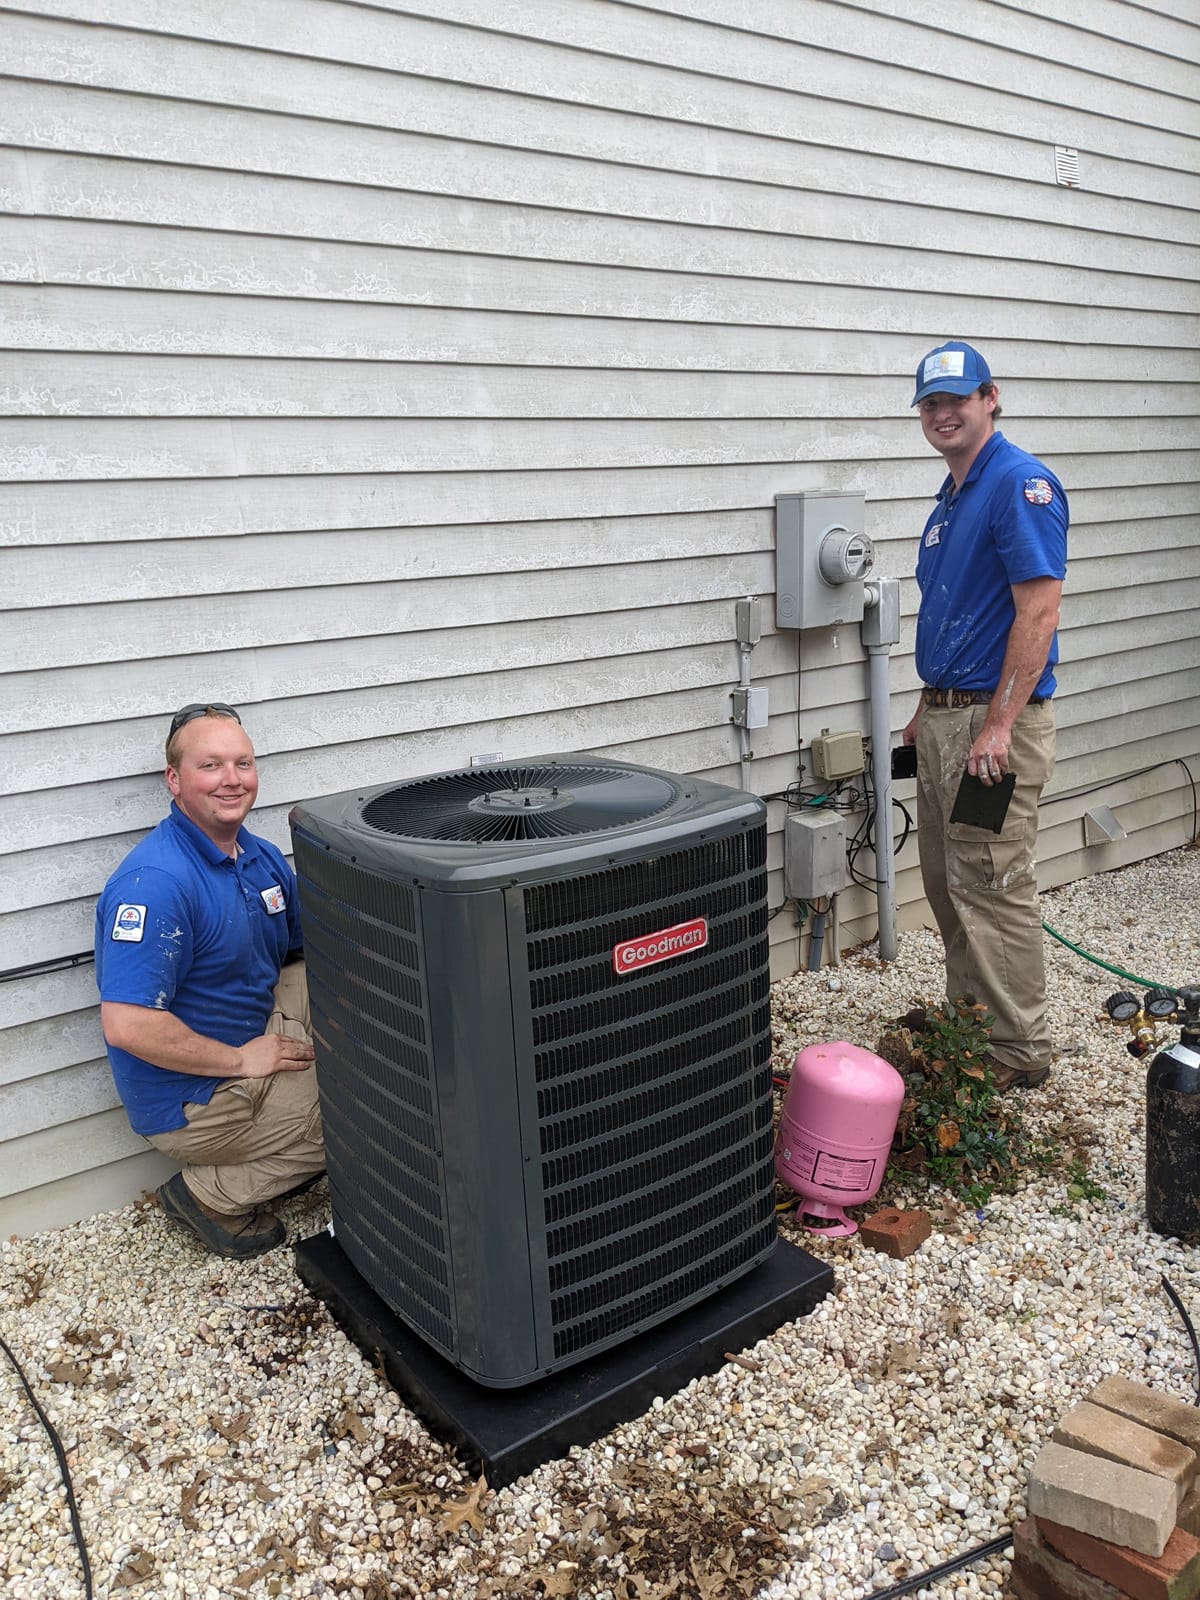 Two technicians servicing an outdoor air conditioning unit.